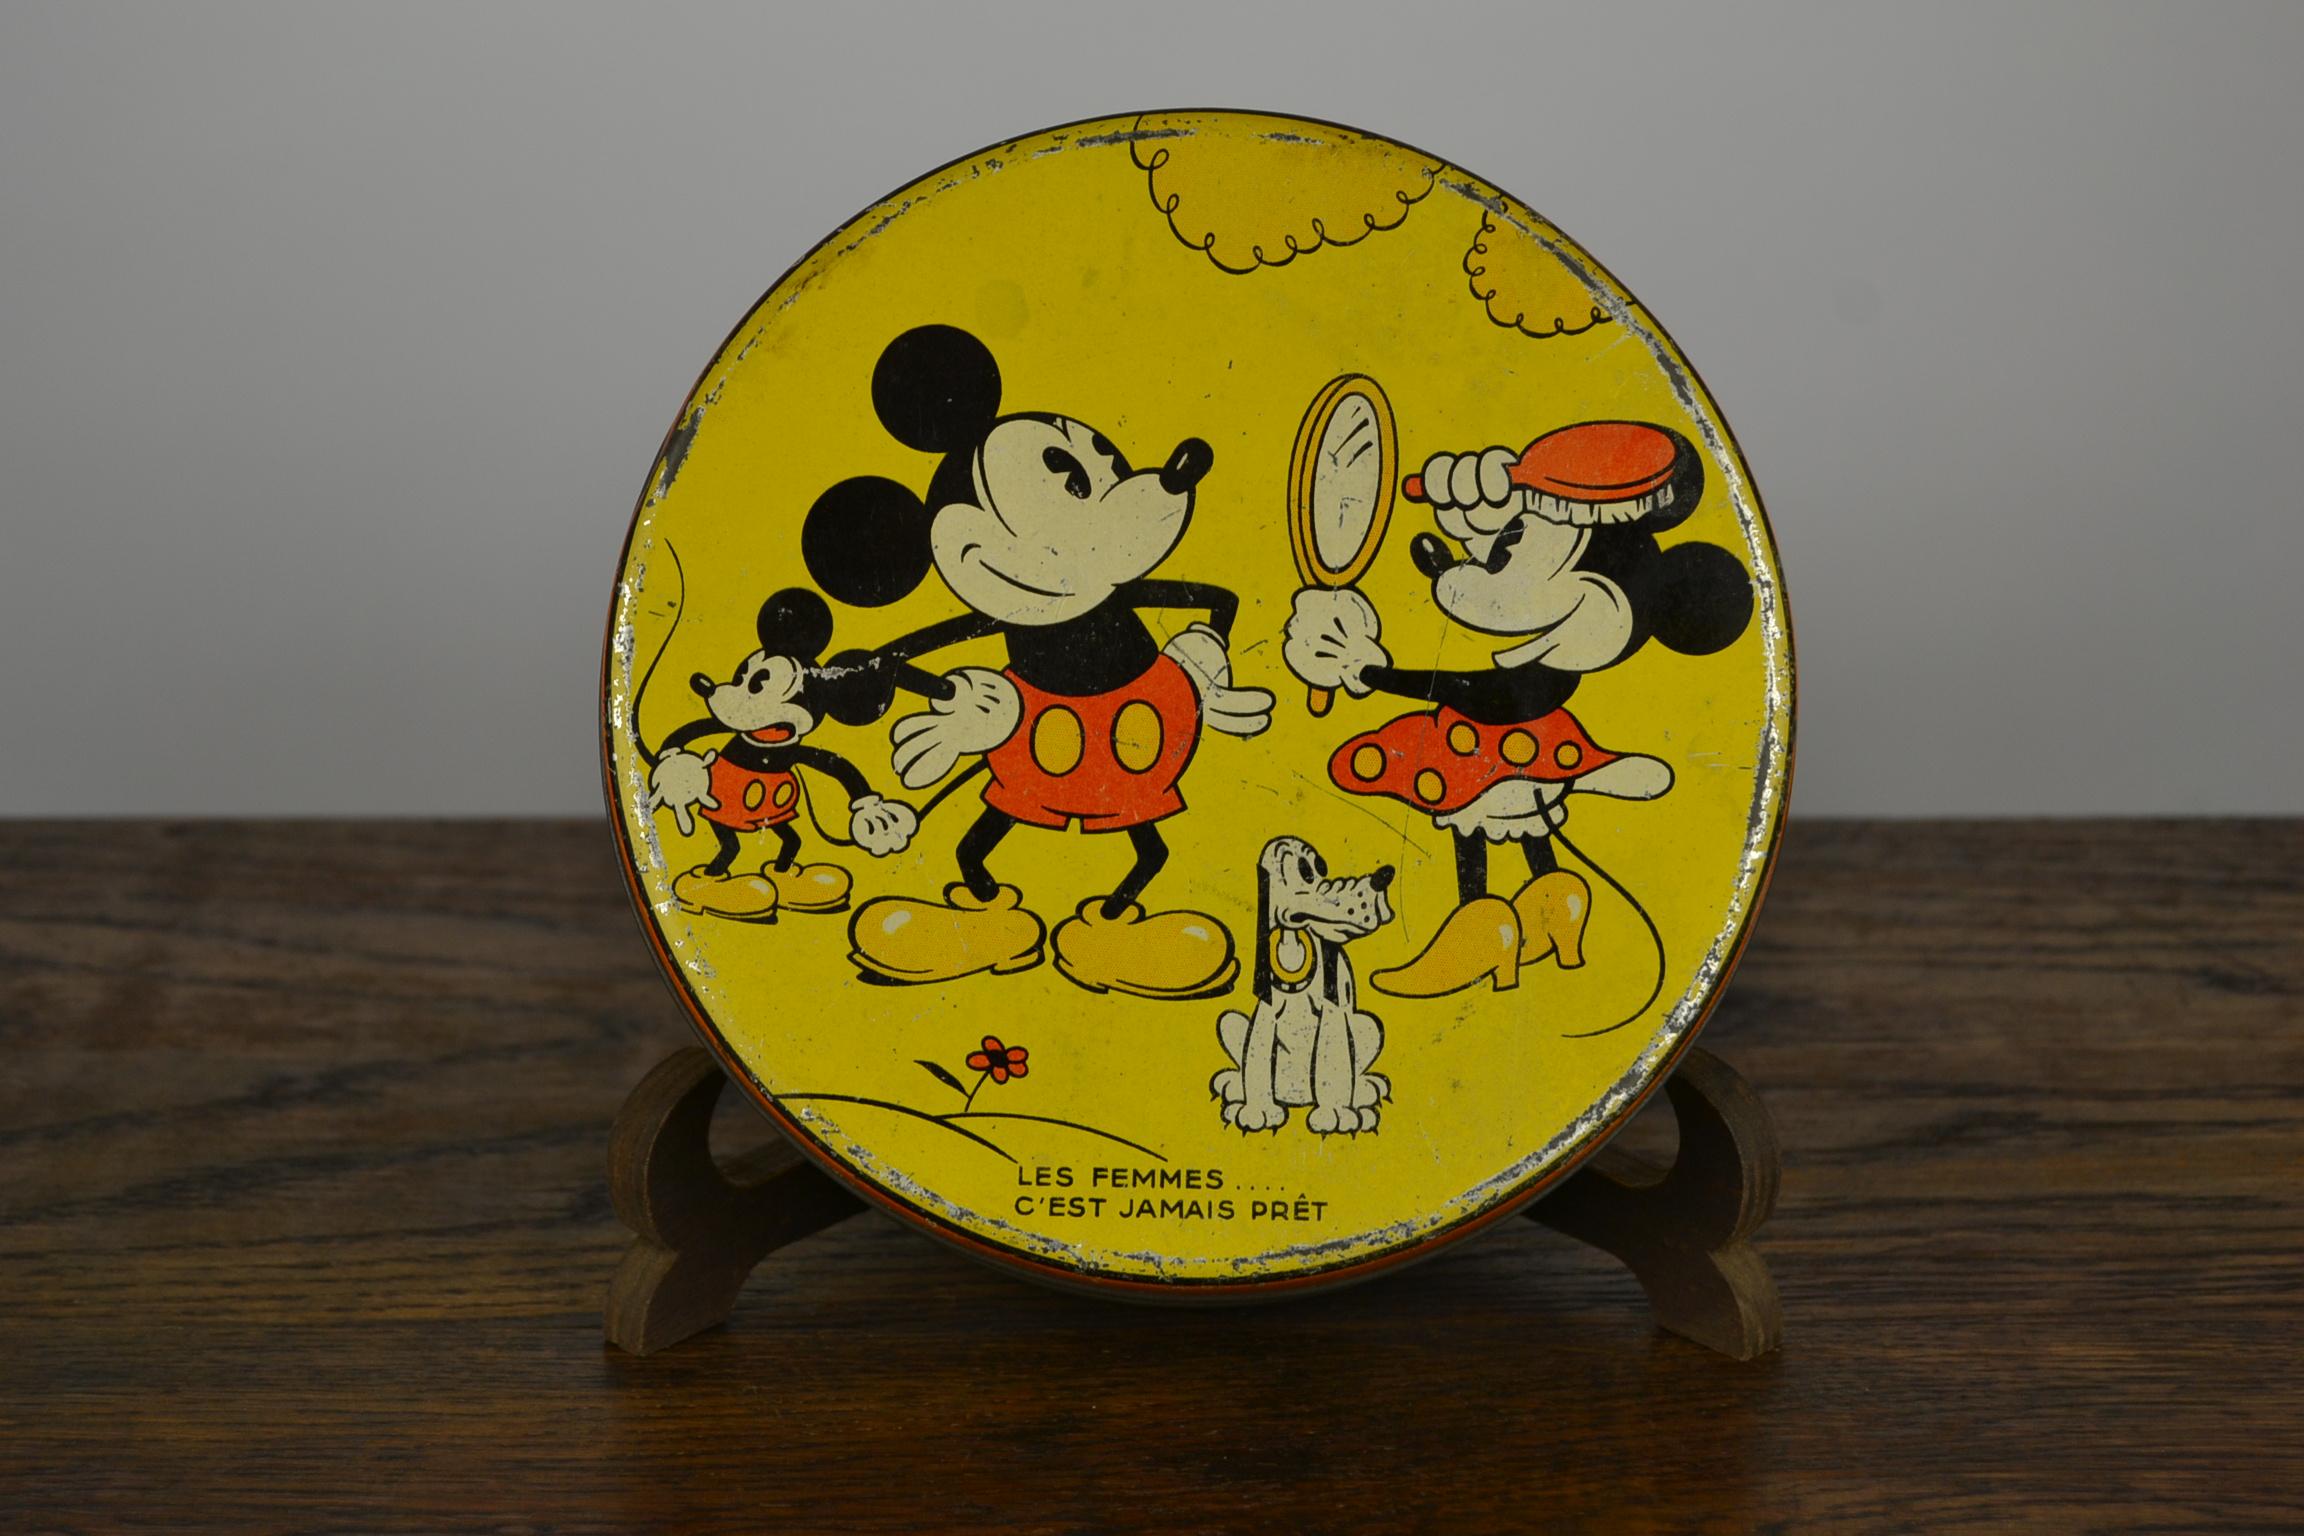 Rare Antique Lithographic Walt Disney Biscuit Tin - Lunch box - Cookie Tin - Disneyana Tin Container 
Round yellow tin with images of Mickey, Minnie Mouse and Pluto, famous Animation Figures.
It was made to sell  cookies - Biscuits, but could be